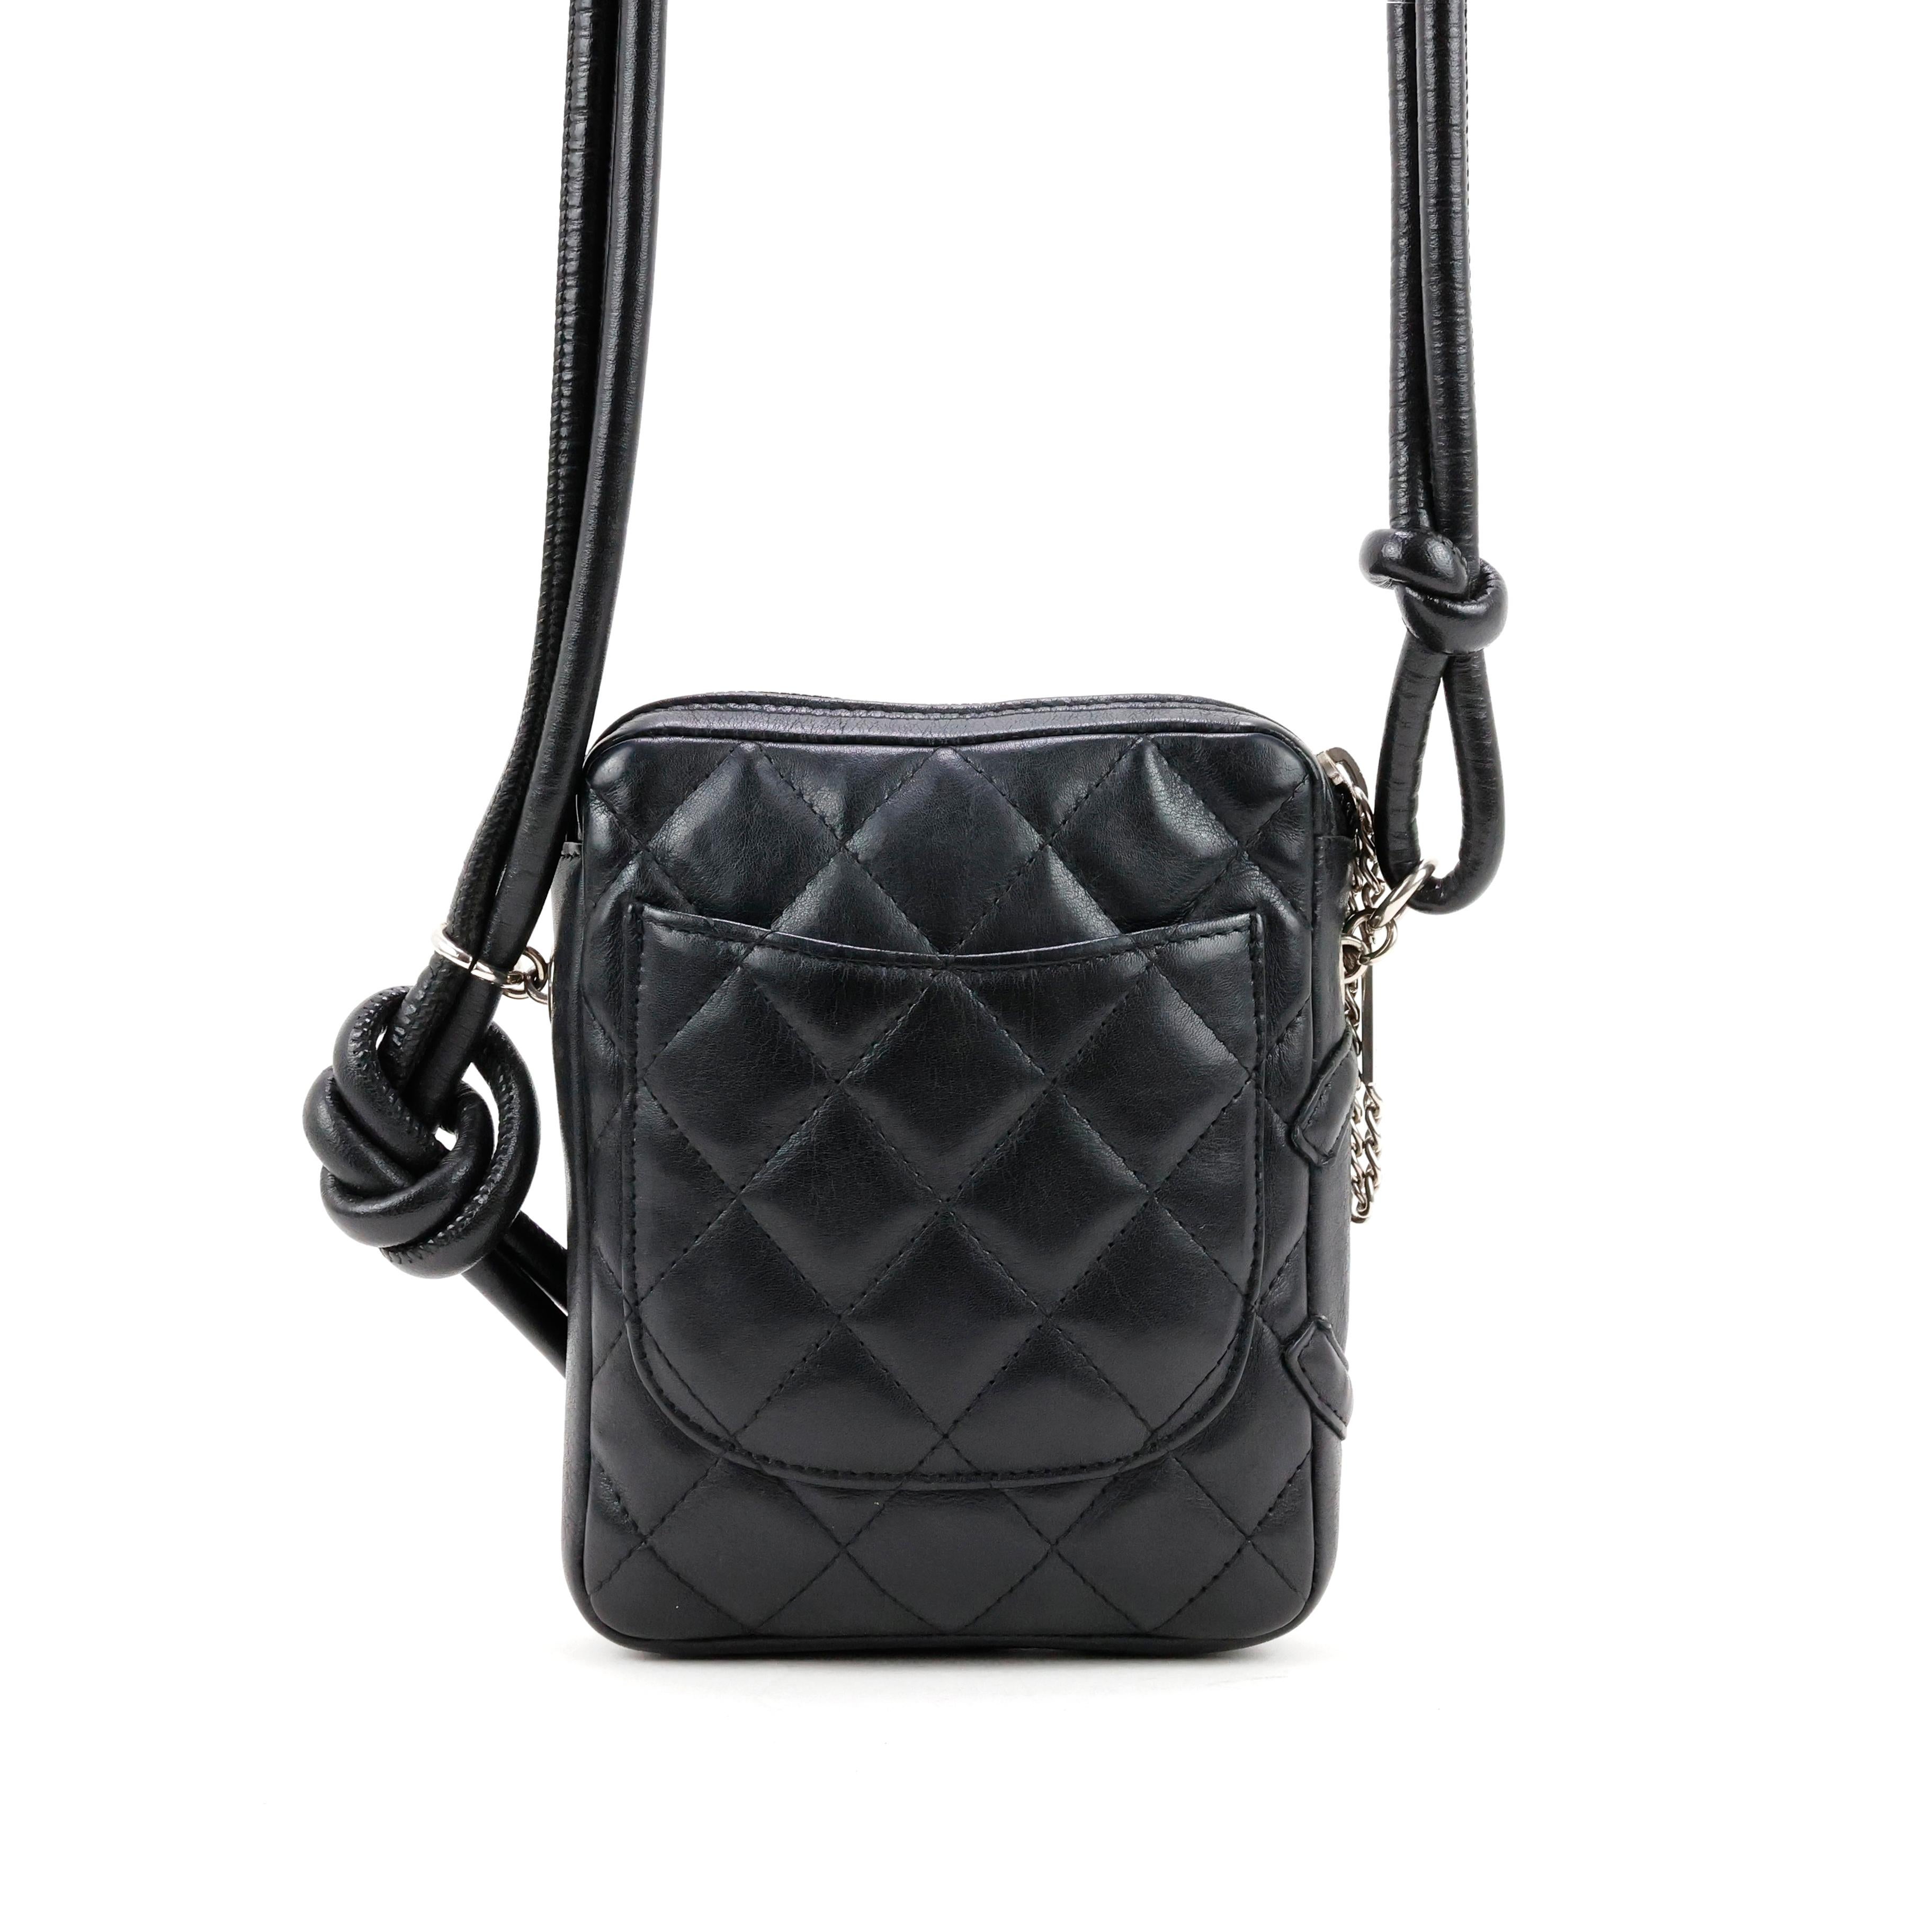 Chanel bag -  Chanel Cambon crossbody bag in leather, color black, silver hardware.

Condition:
Good/really good. Externally is in really good, internally there are some unstitched parts.

Packing/accessories:
Dustbag and box.

Measurements:
13,5cm